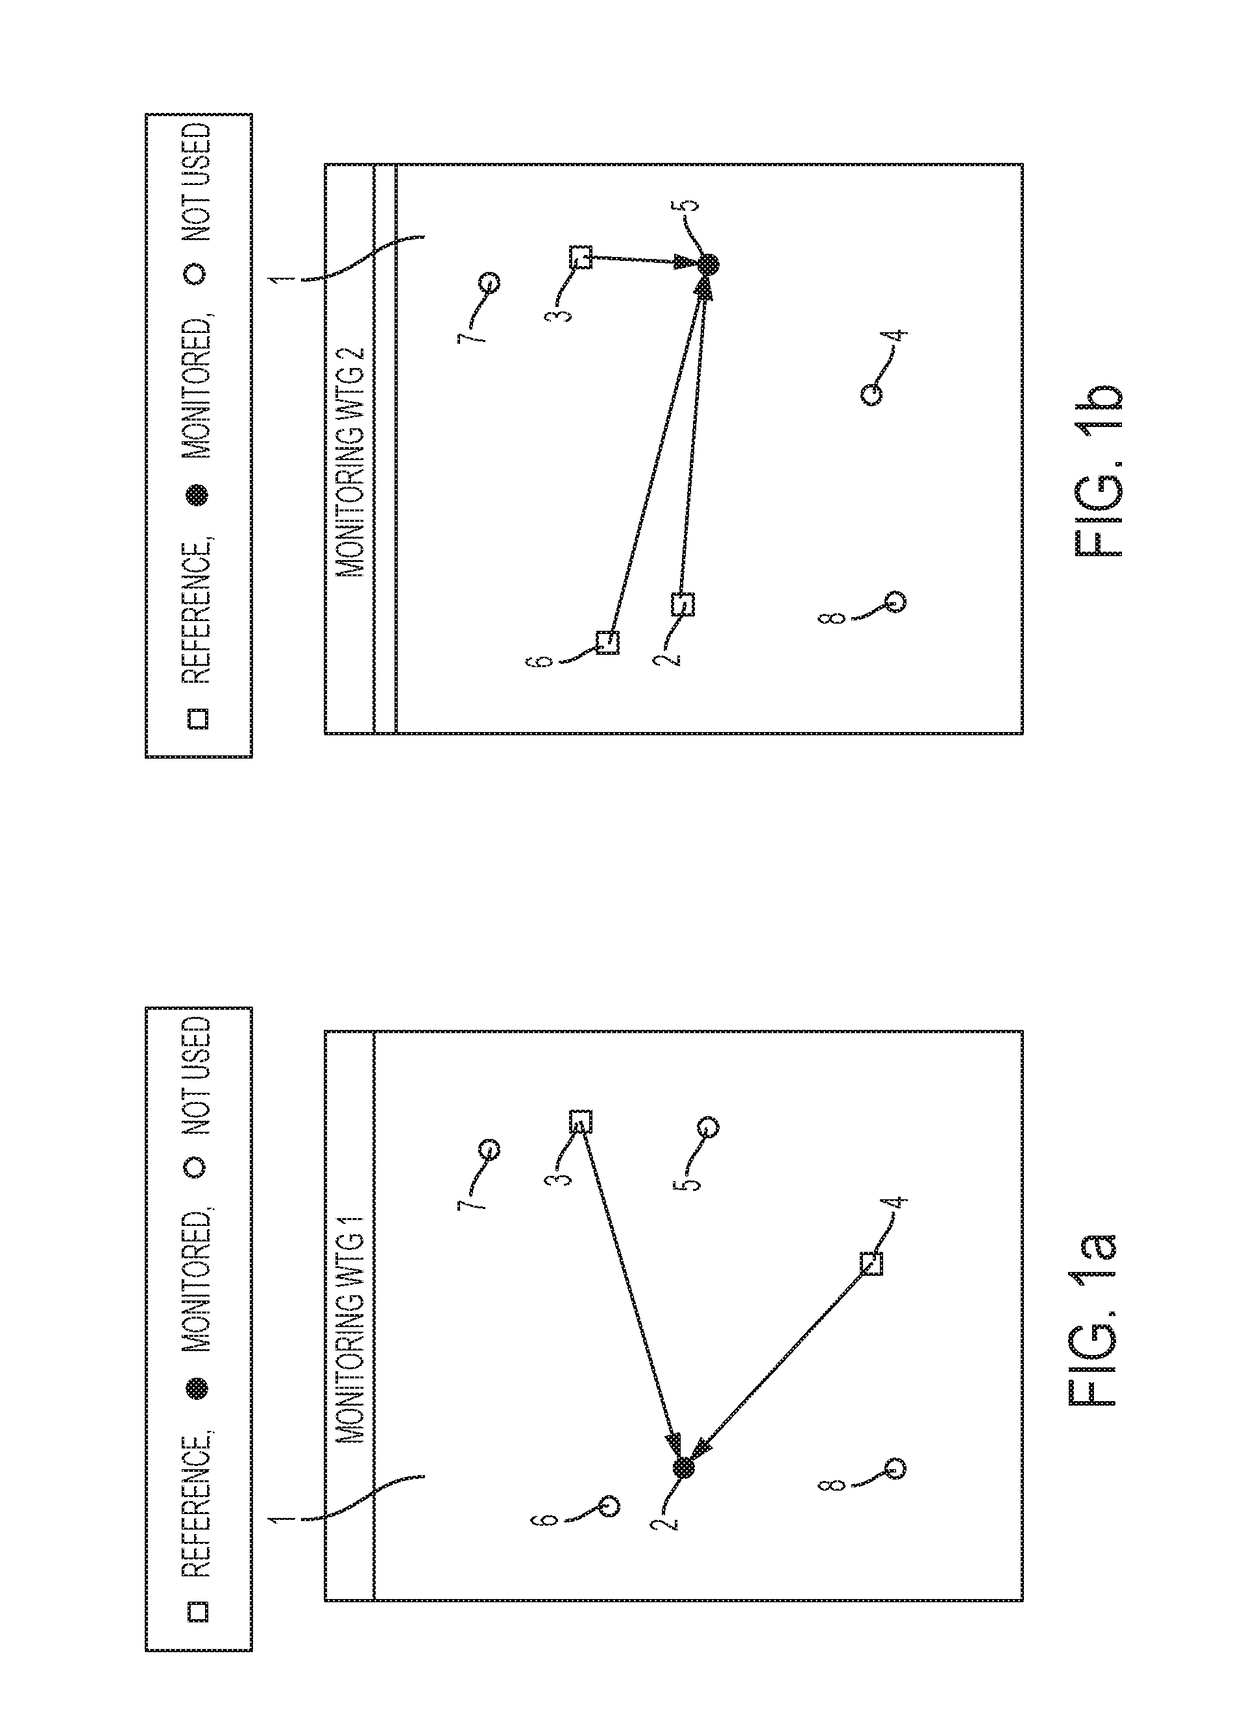 A method for monitoring and assessing power performance changes of a wind turbine